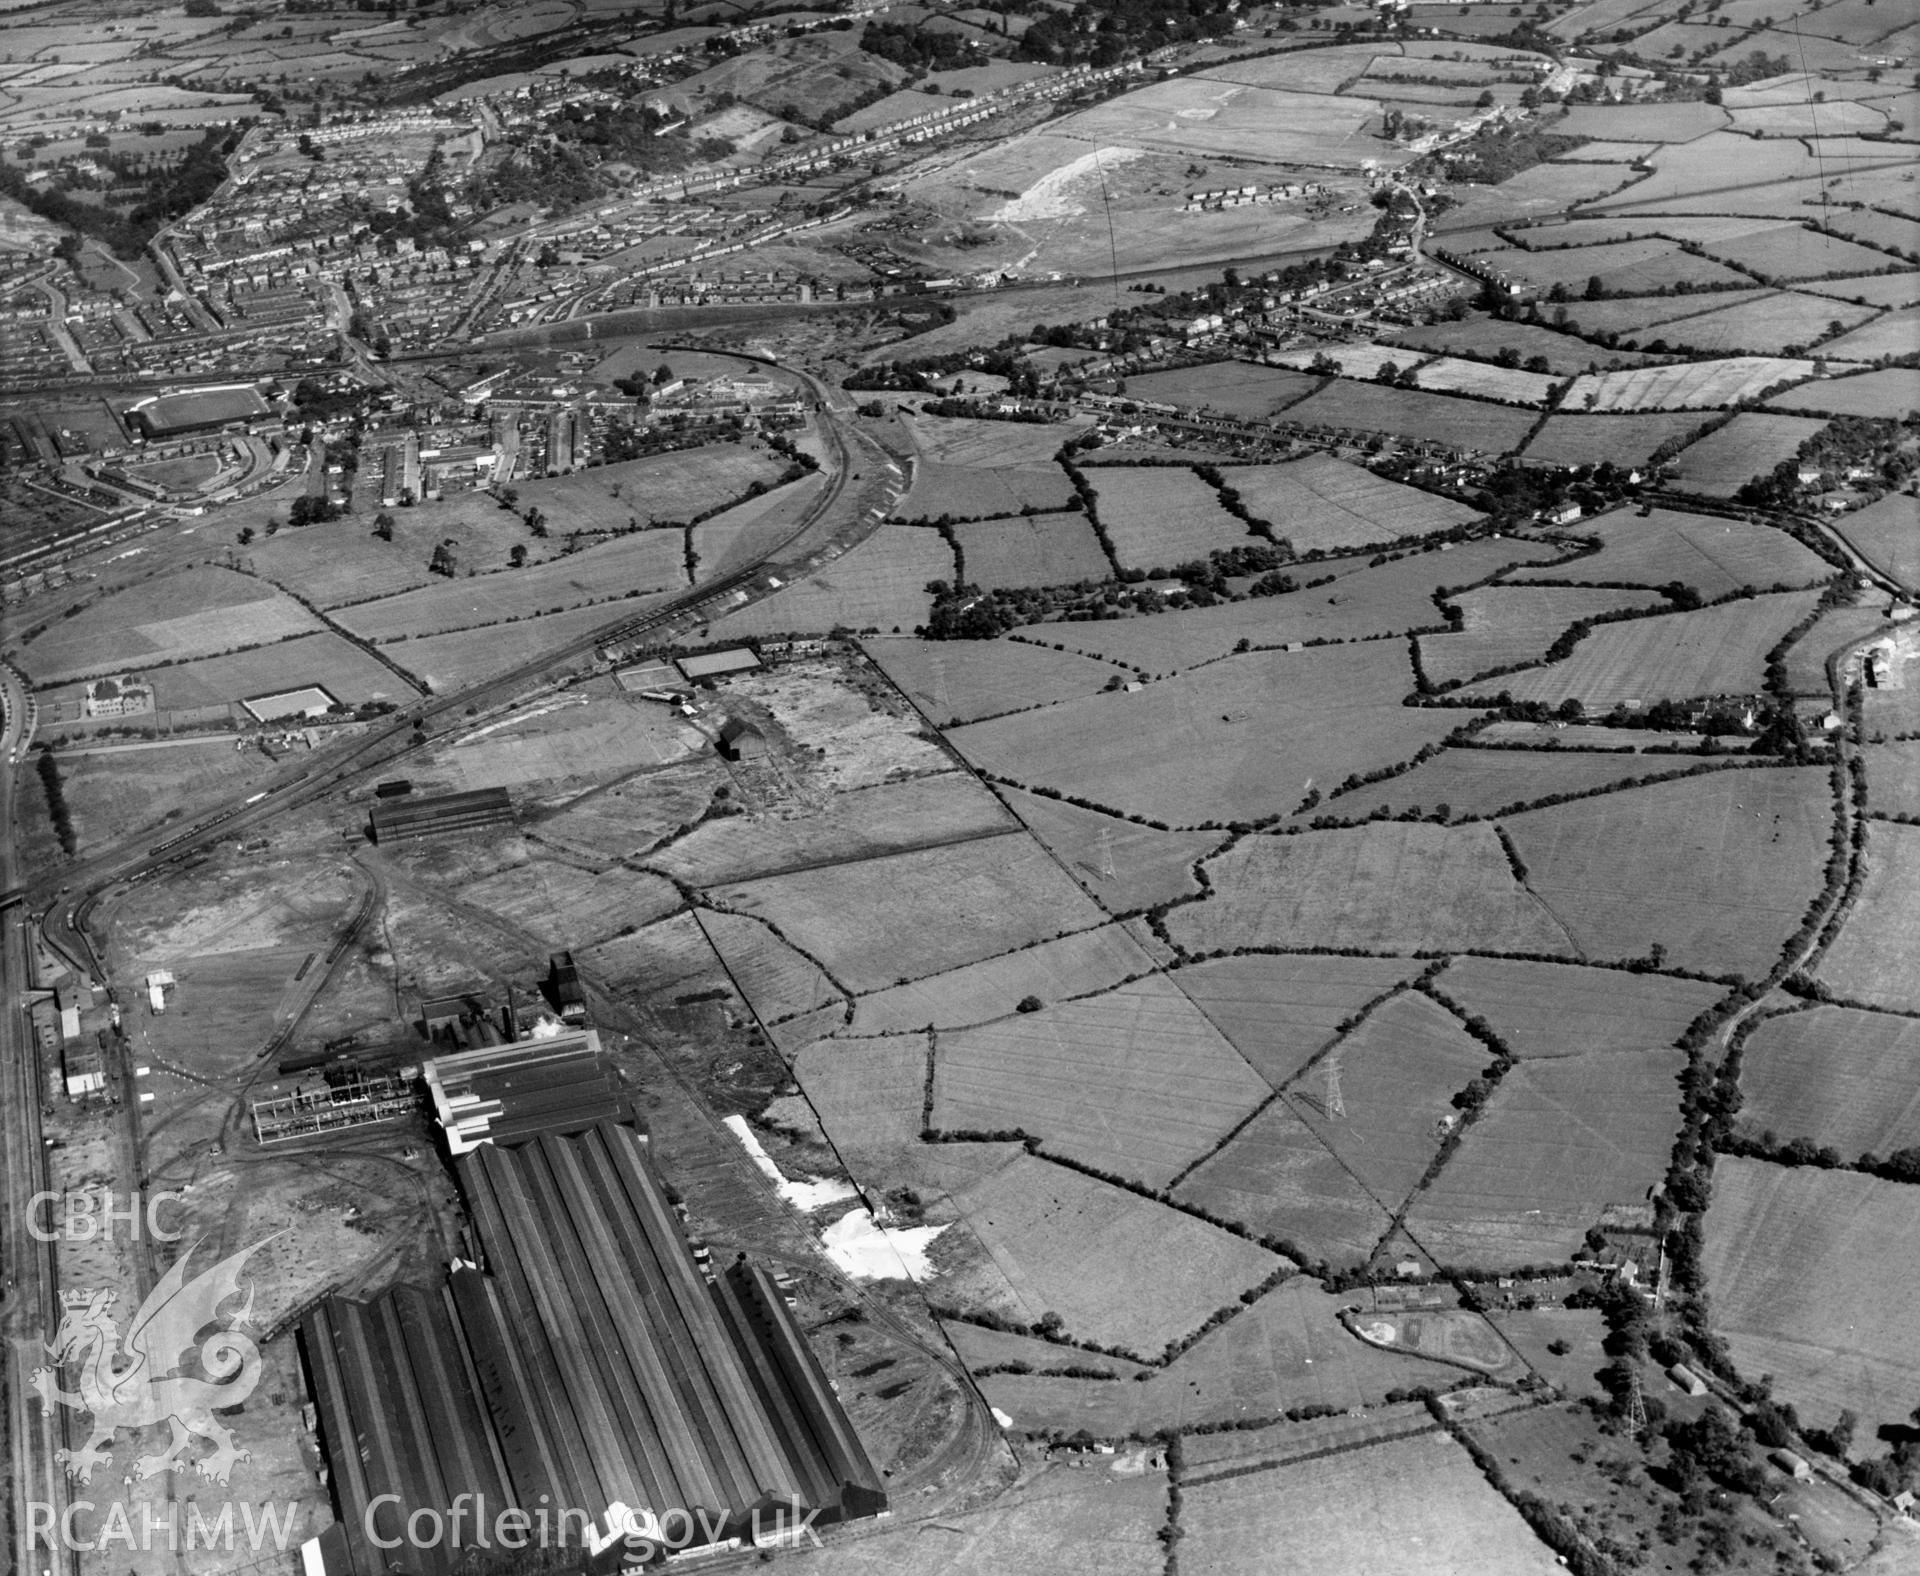 View of Orb Steelworks, Newport, oblique aerial view. 5?x4? black and white glass plate negative.